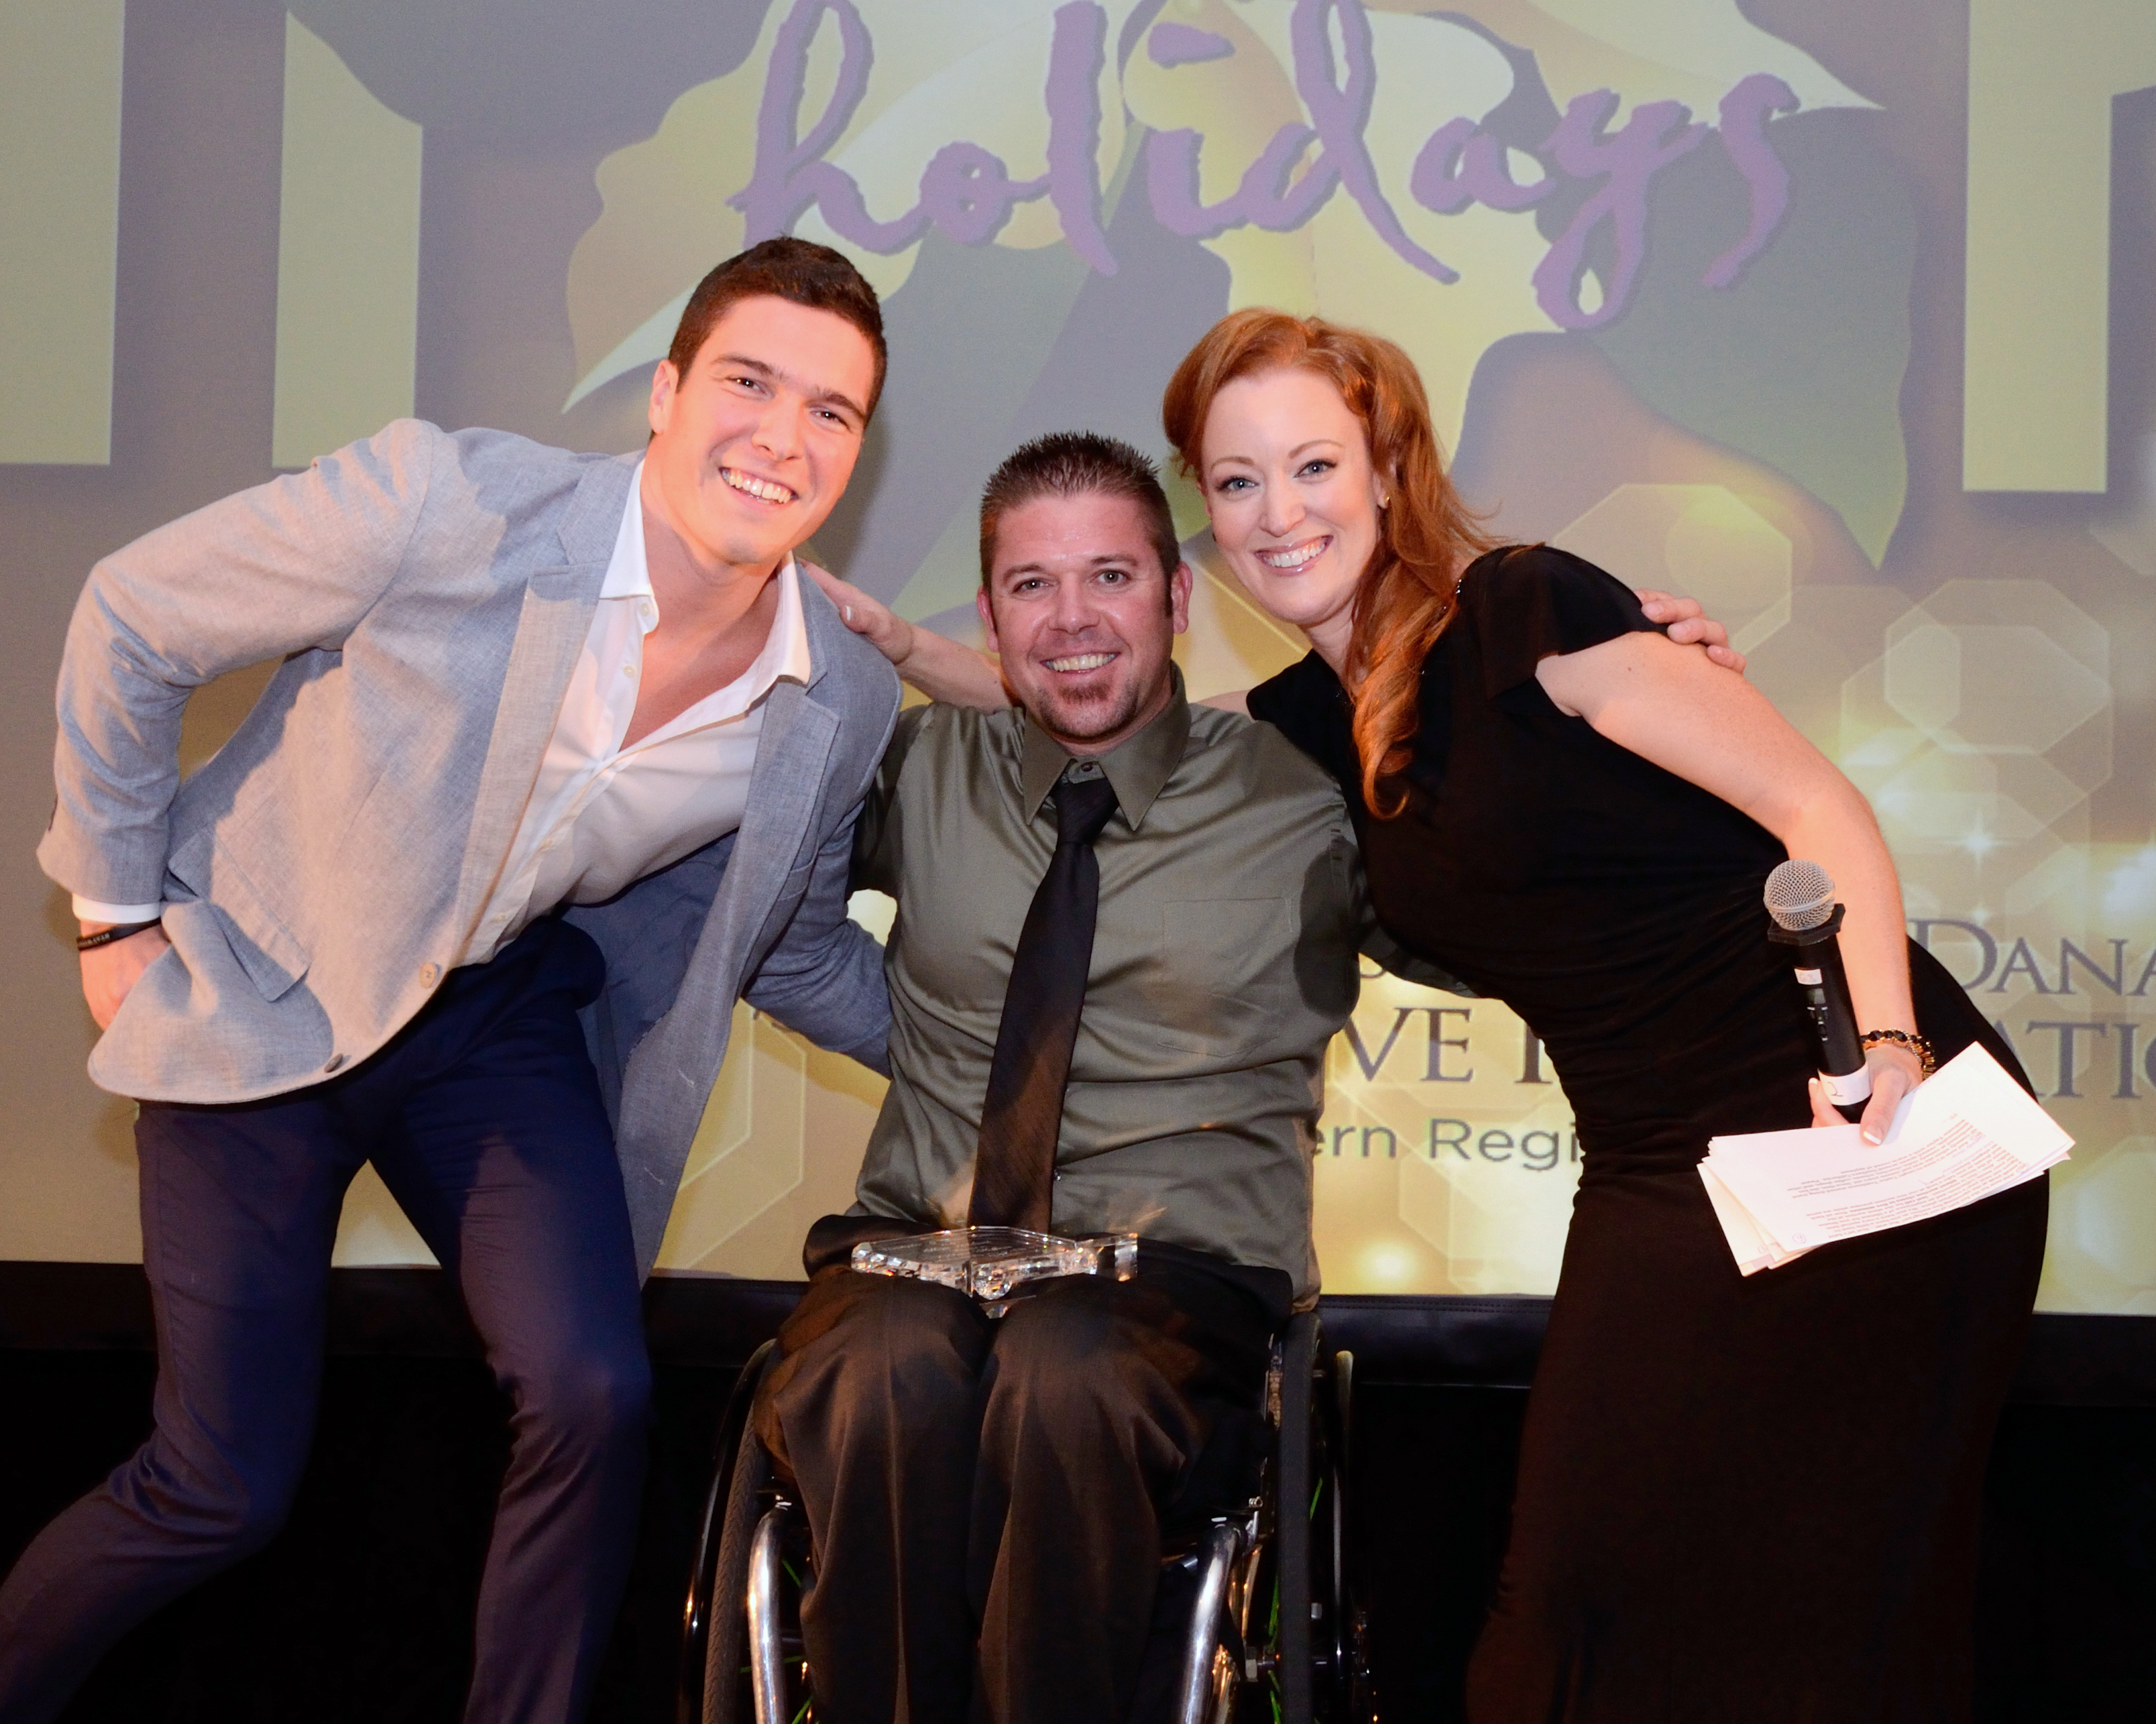 Will Reeve and Adele René presenting the HOPE Award at Christopher and Dana Reeve Foundation Gala Dec 7, 2014